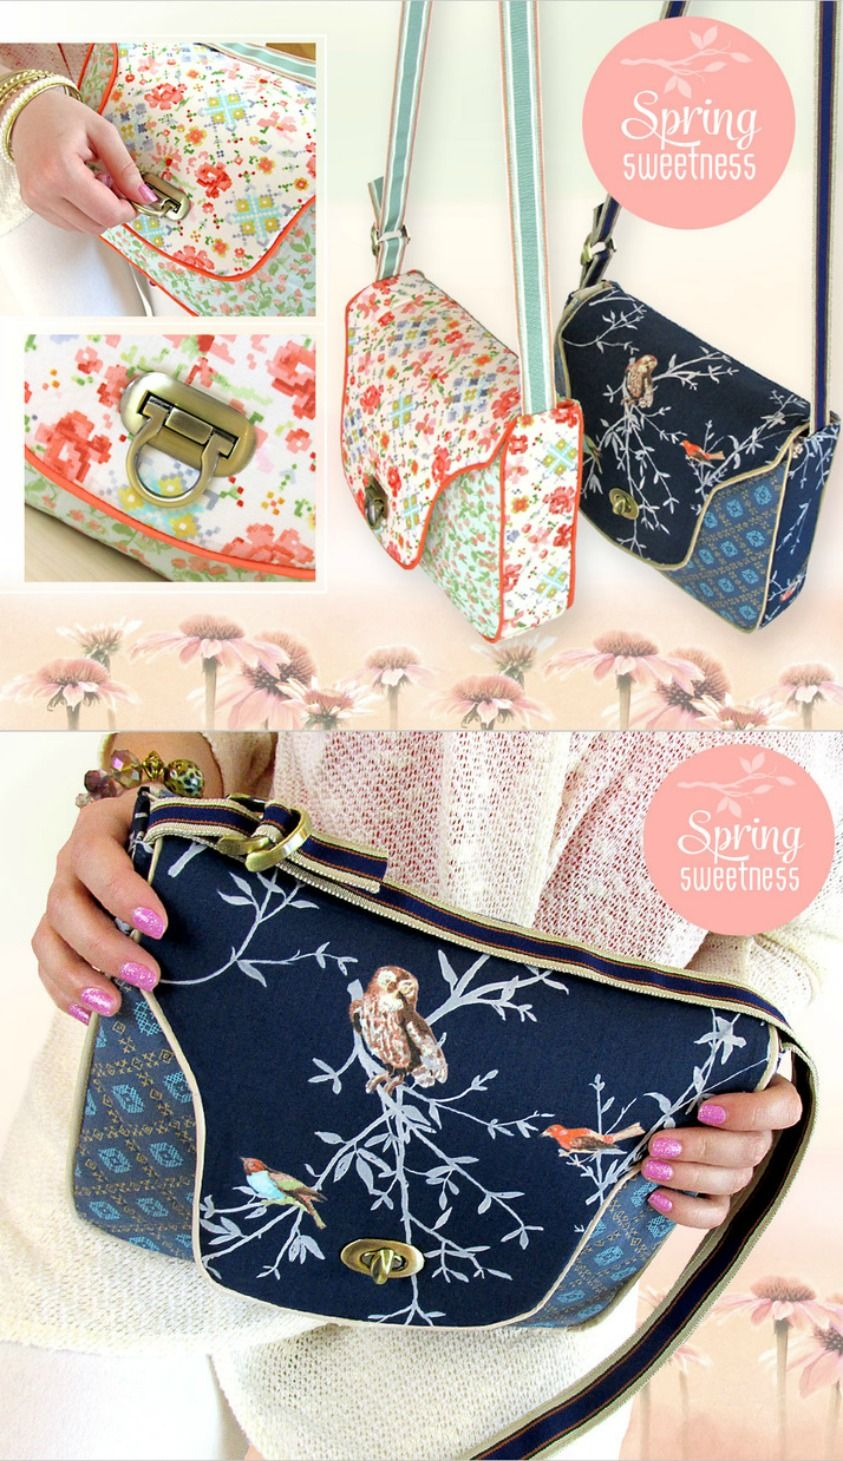 Purse Sewing Patterns Free Purse Sewing Pattern Cross Body Sewing Tutorial Bags And